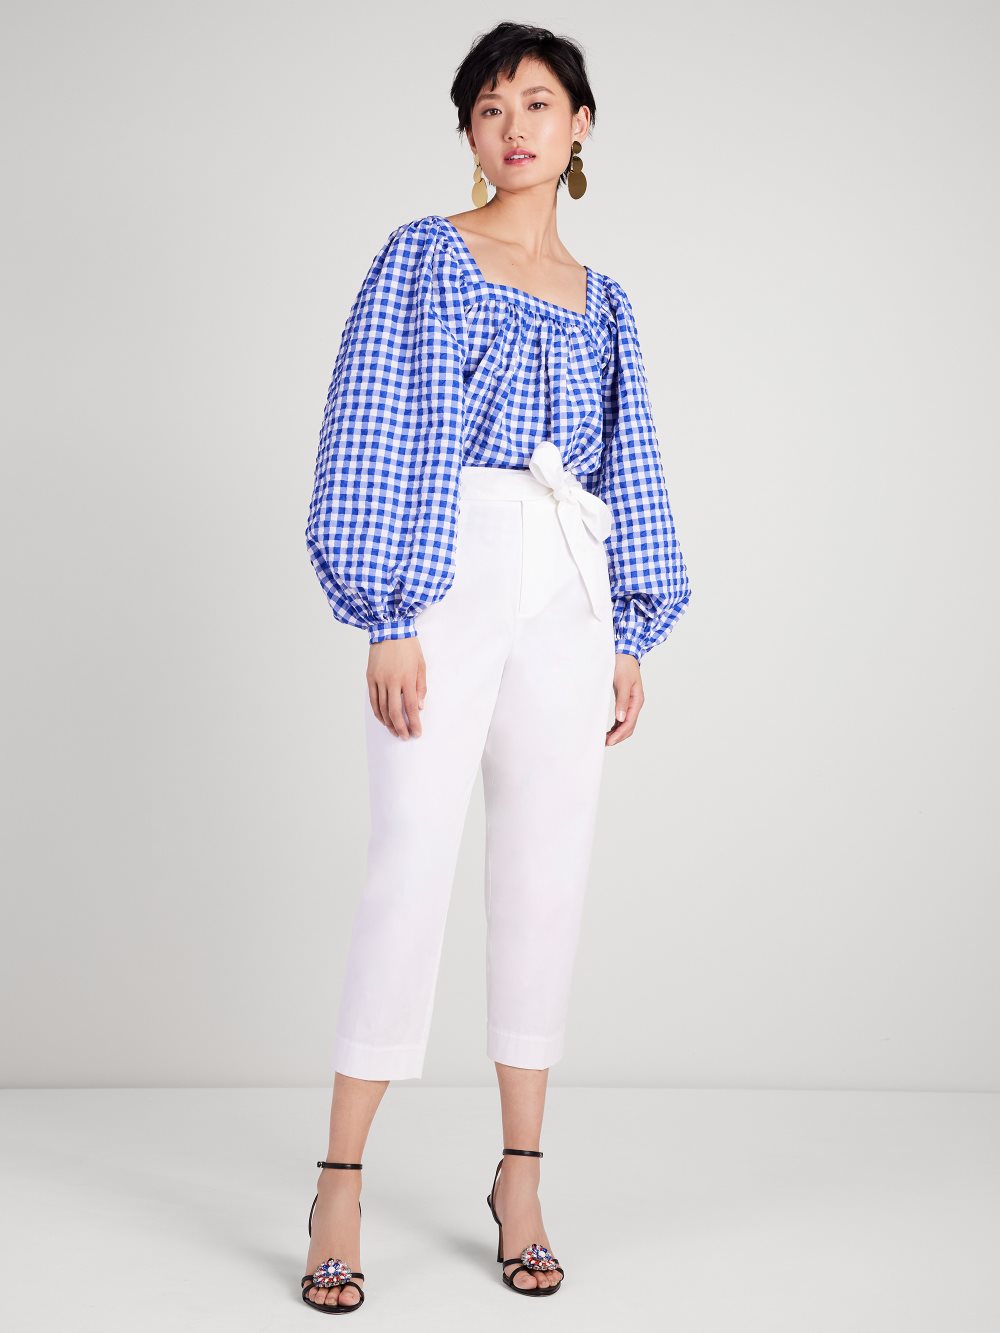 Women's blueberry gingham square-neck top | Kate Spade